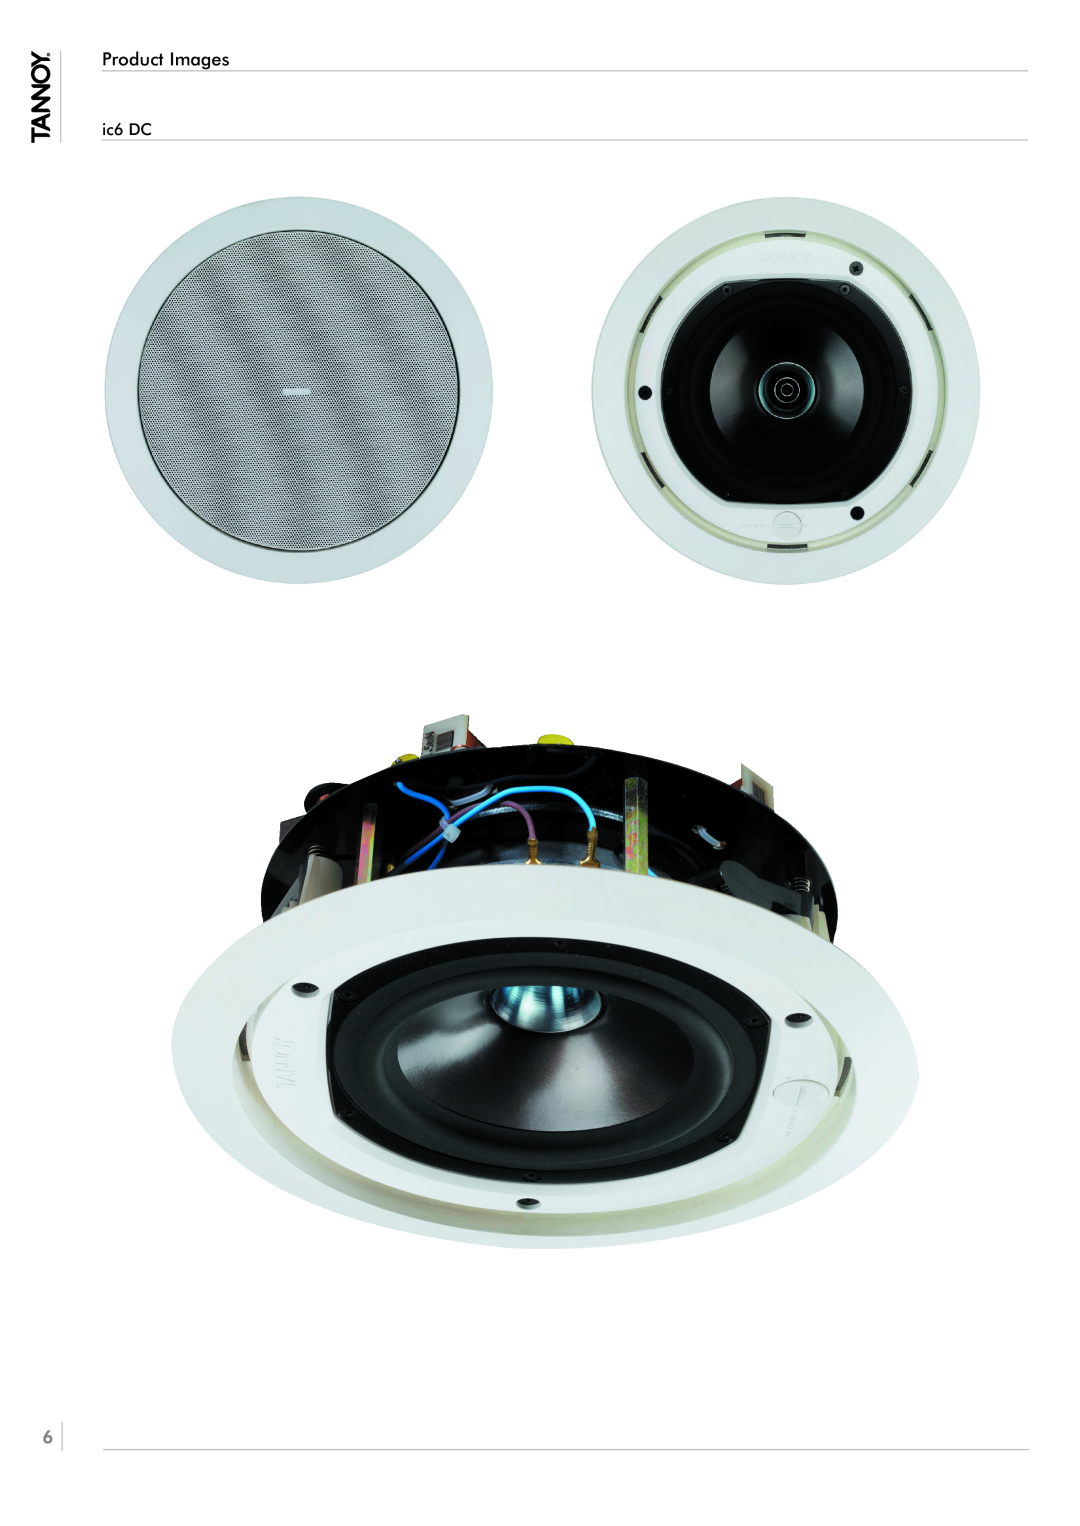 Tannoy ic6 DC owner manual Product Images 